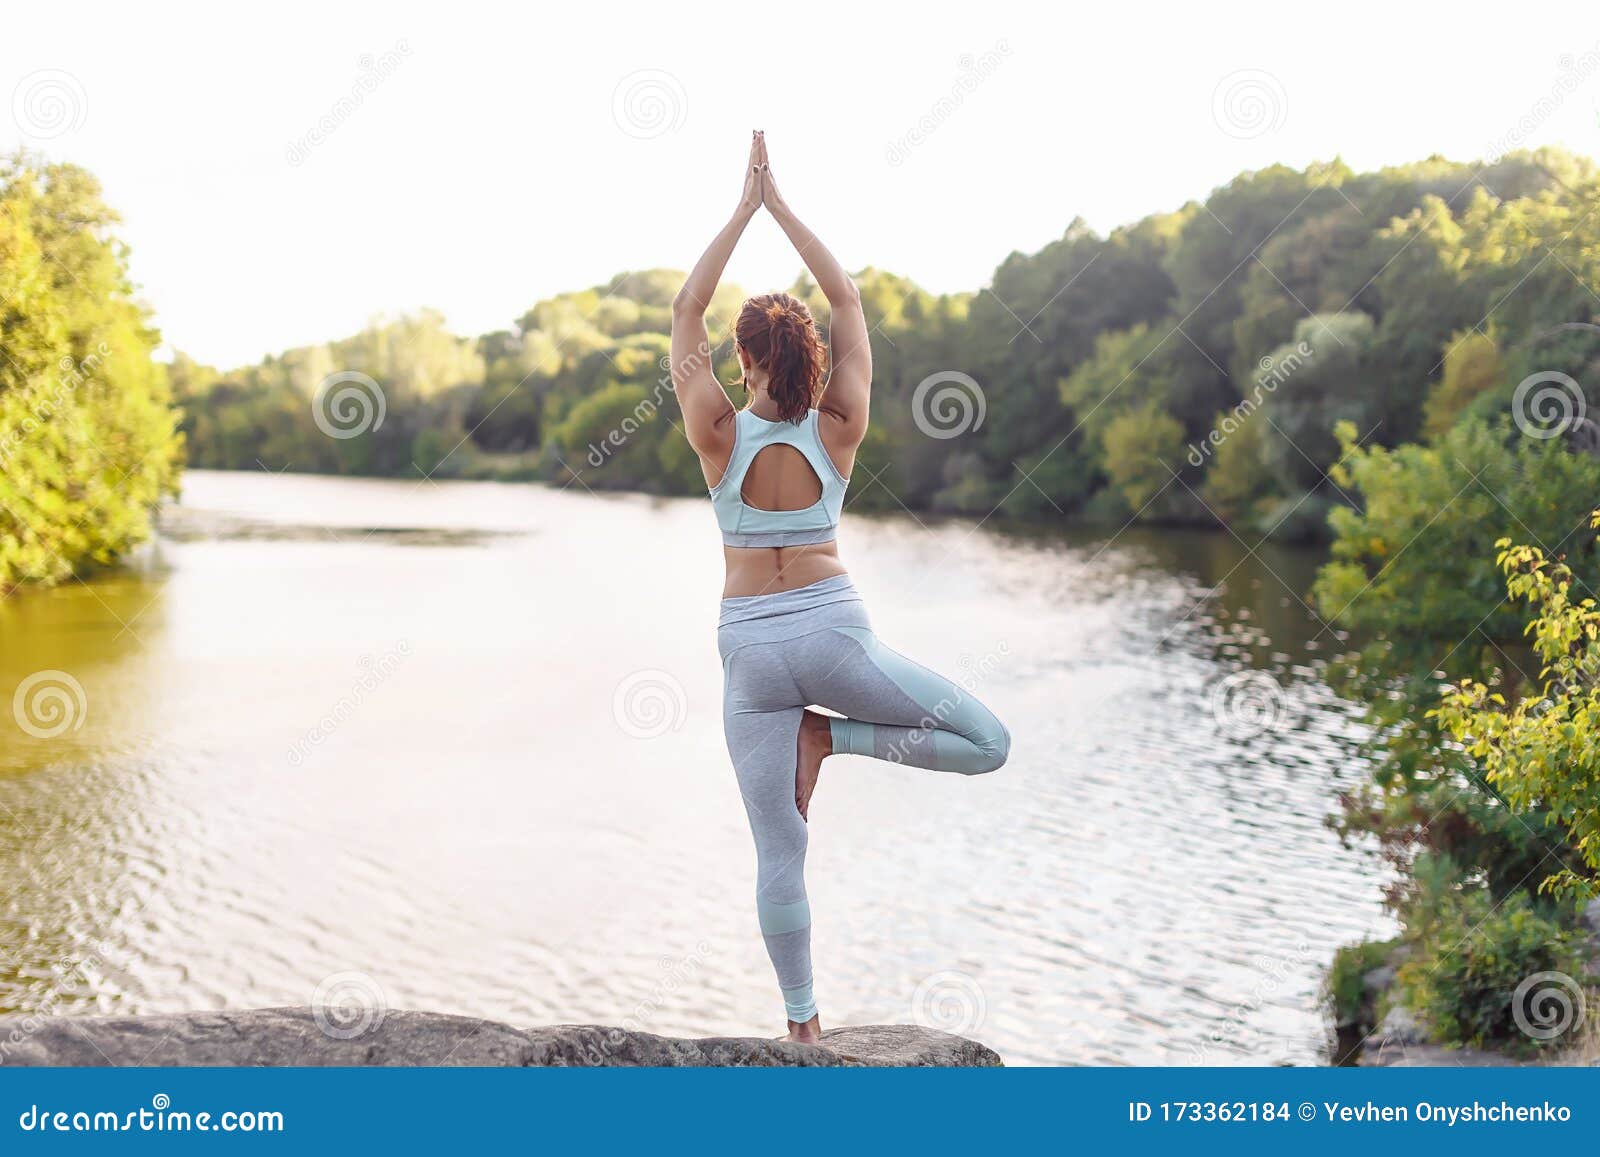 7,721 Sexy Young Woman Yoga Stock Photos - Free & Royalty-Free Stock Photos  from Dreamstime